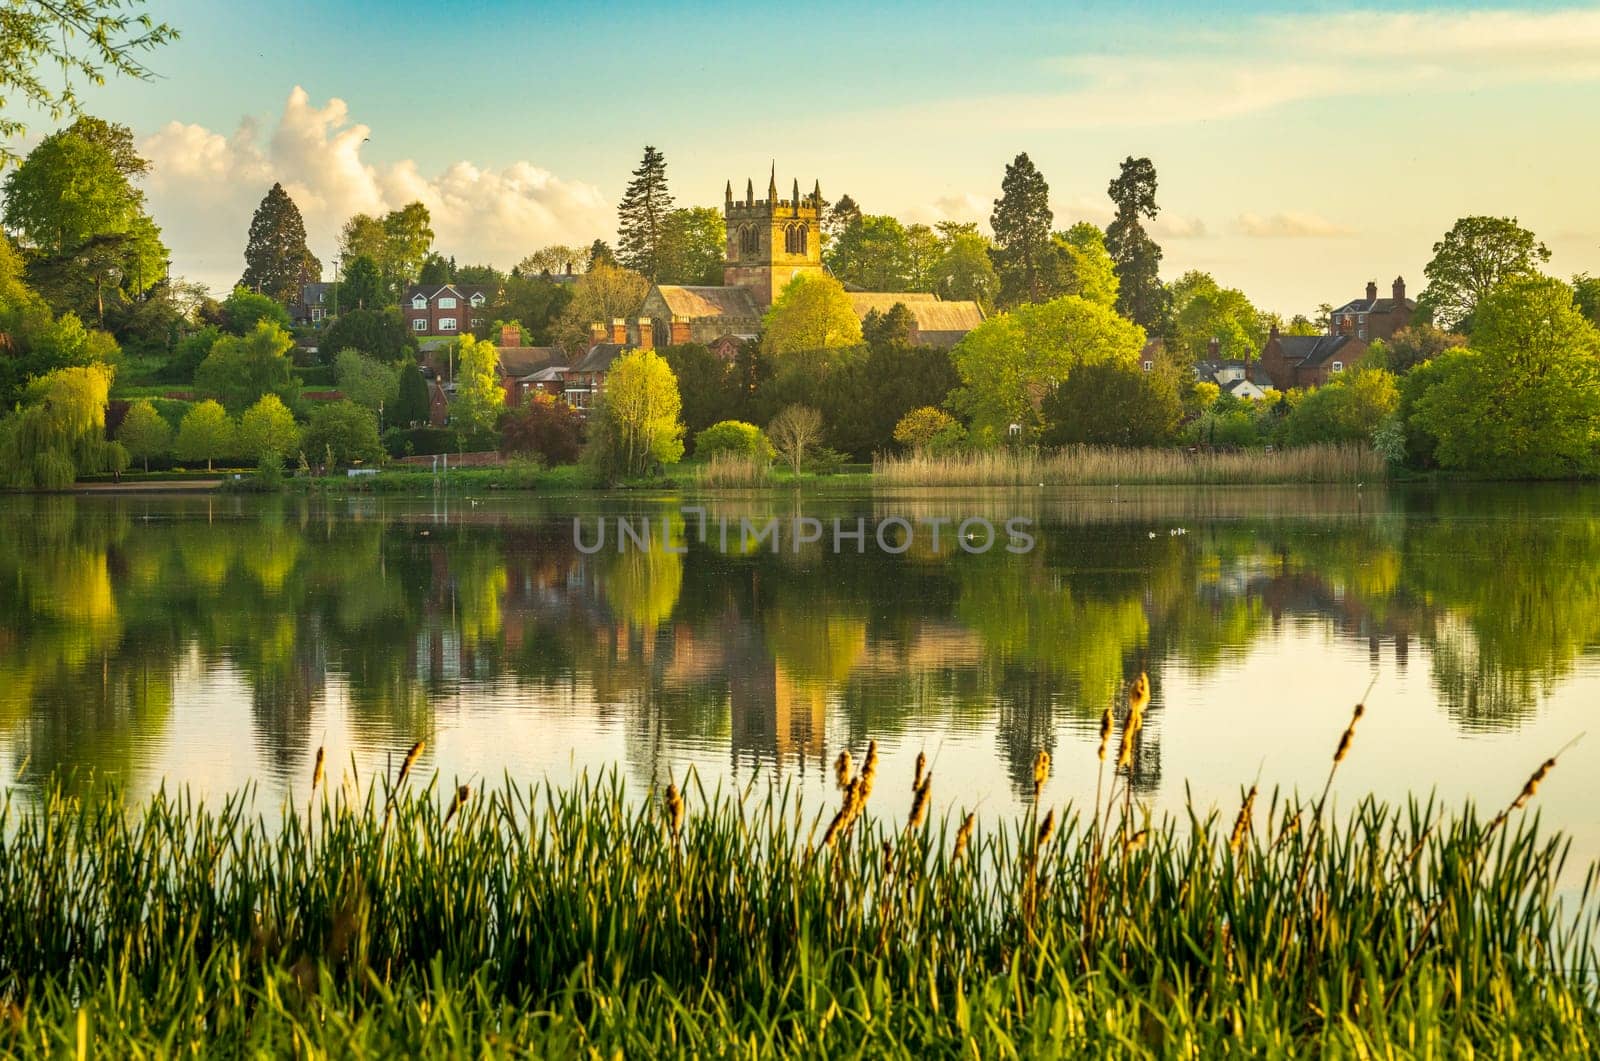 Town of Ellesmere in Shropshire with reflection view from across the Mere to the Church